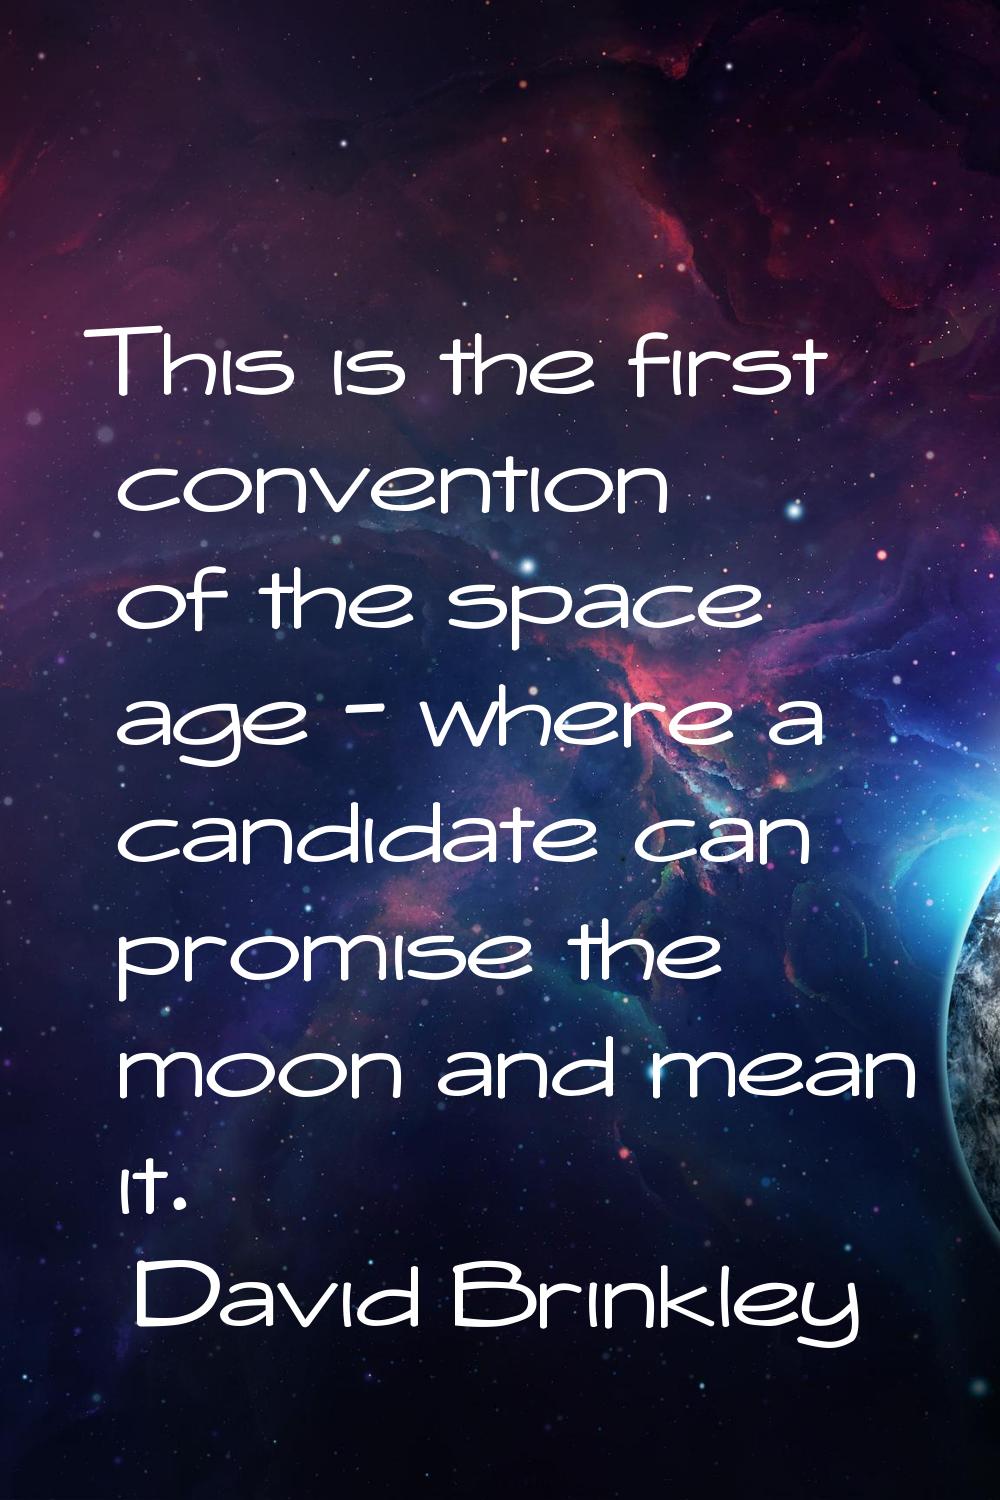 This is the first convention of the space age - where a candidate can promise the moon and mean it.